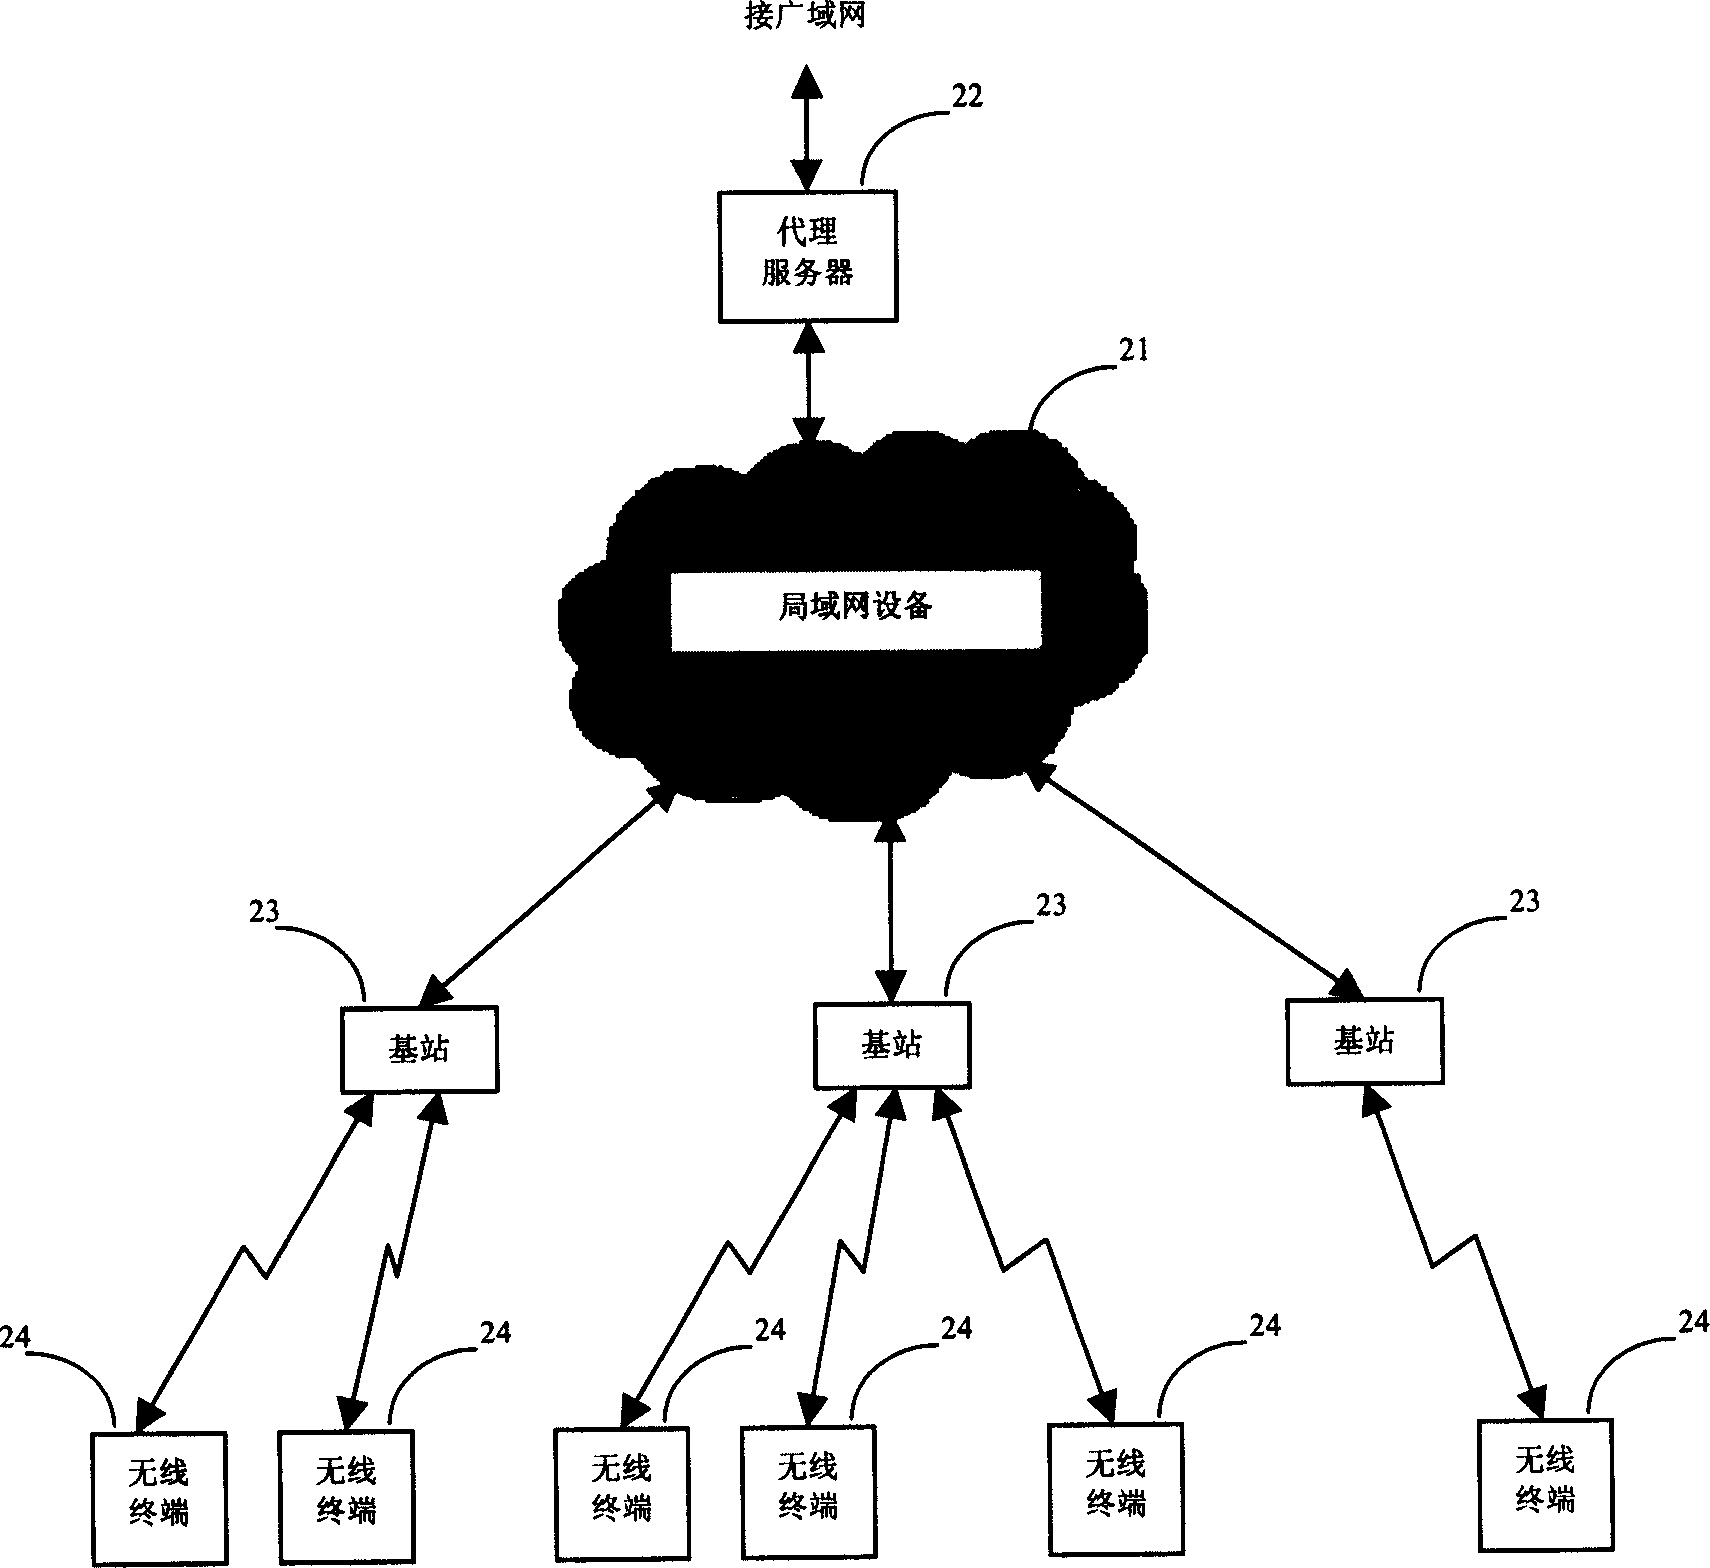 A method of mobility management in mobile communication system